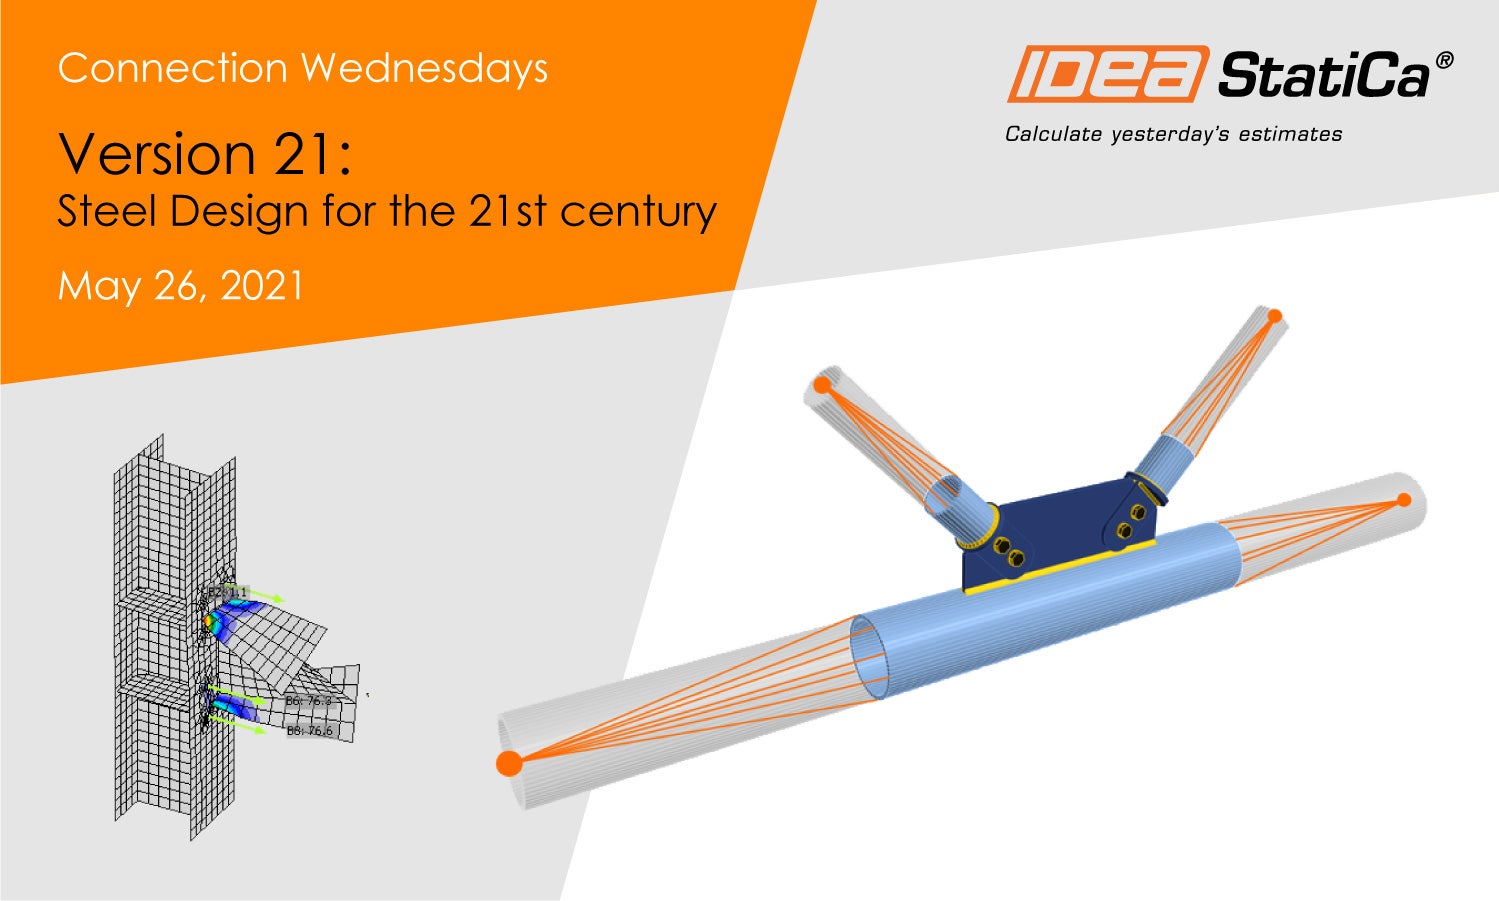 Connection Wednesdays - Version 21: Steel design for the 21st century